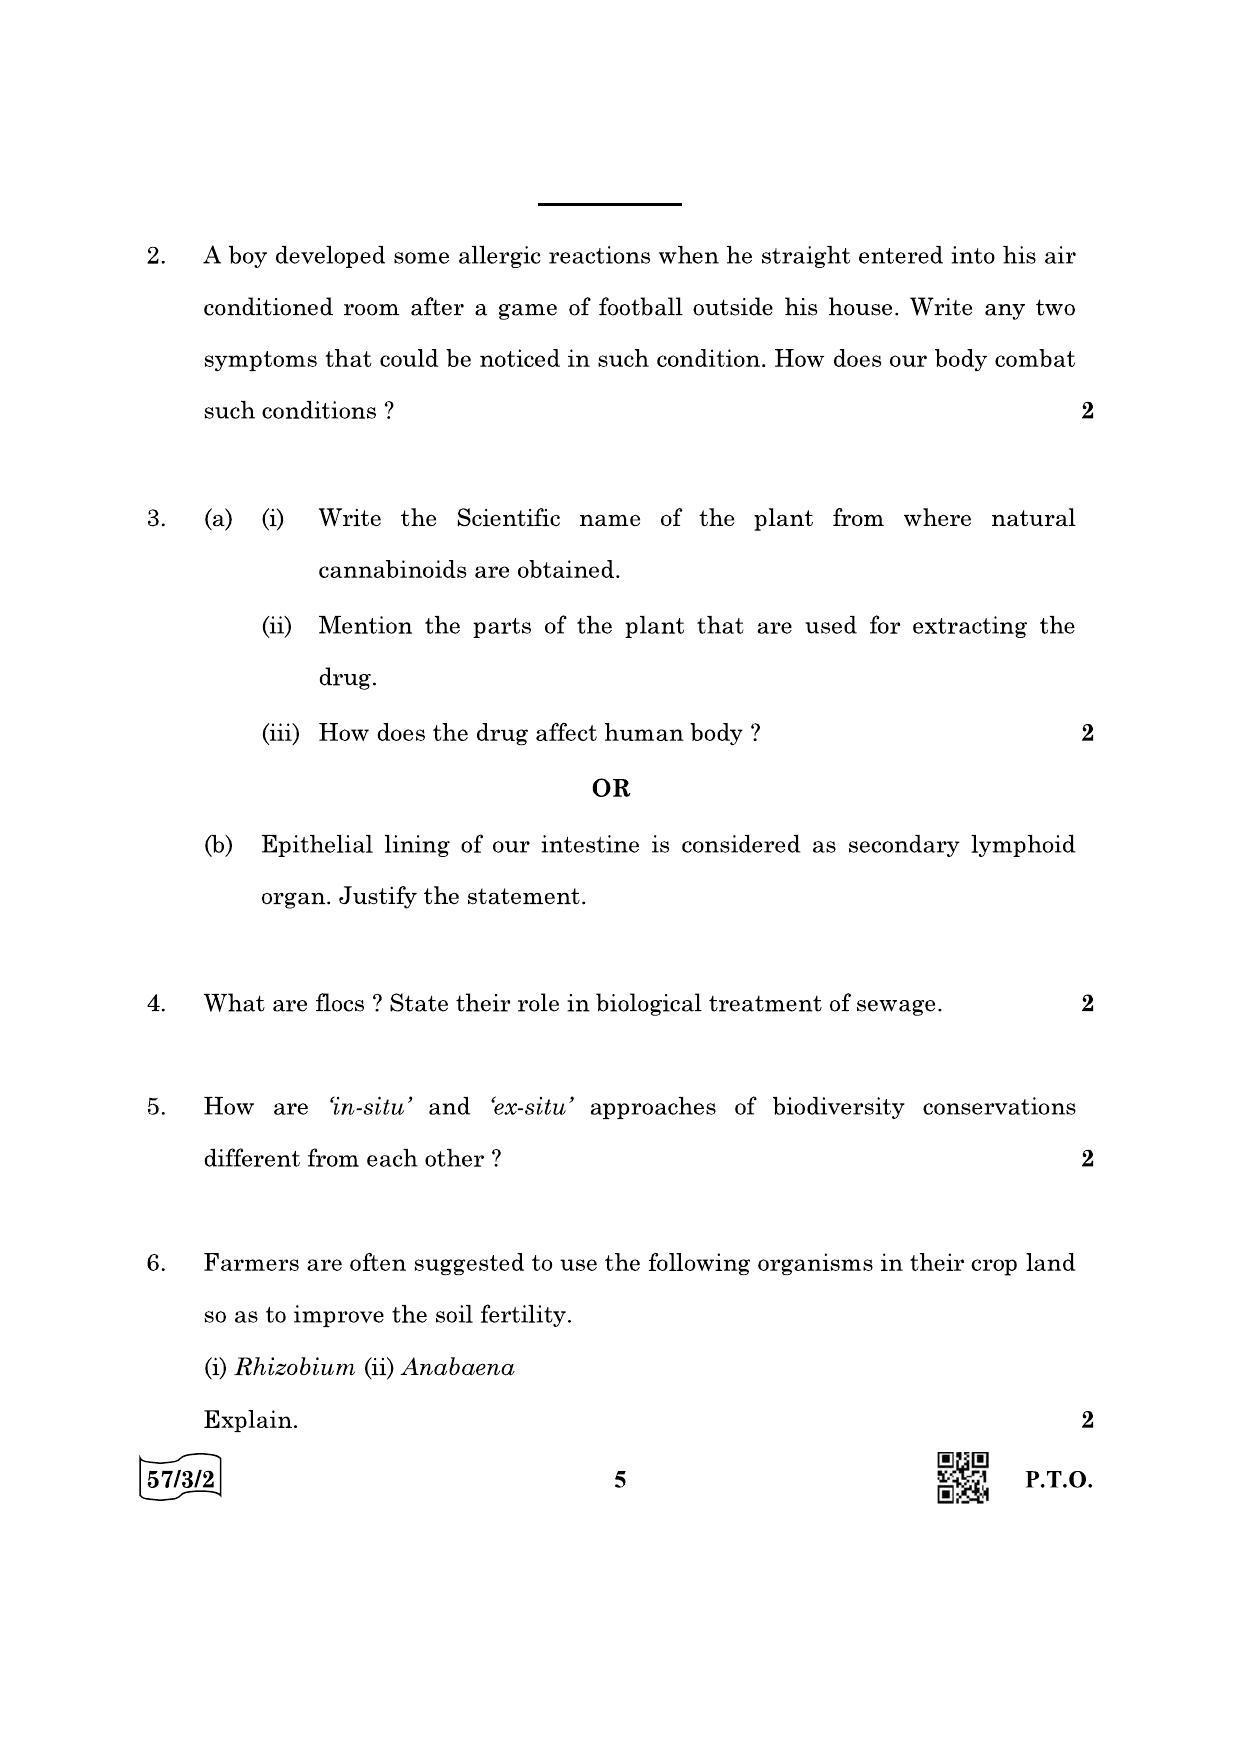 CBSE Class 12 57-3-2 Biology 2022 Question Paper - Page 5